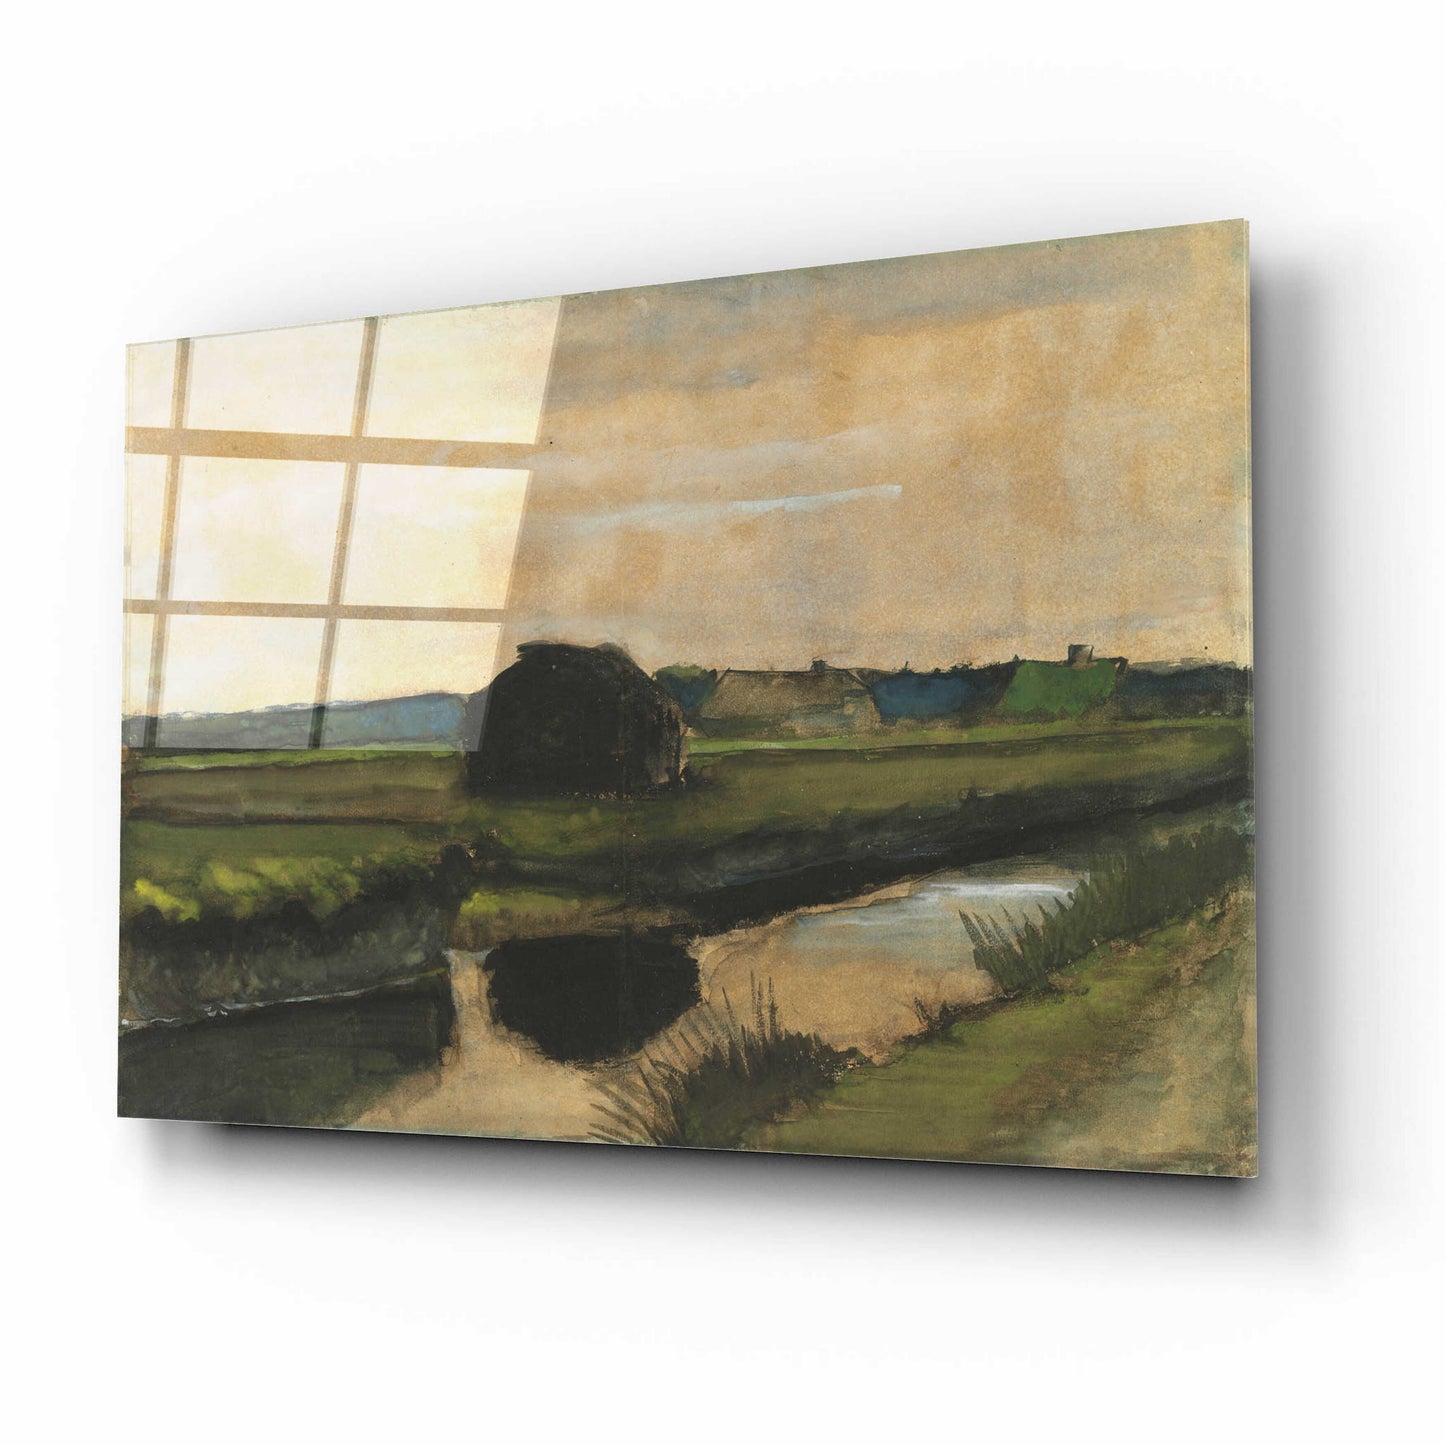 Epic Art 'Landscape With A Stack Of Peat And Farmhouses' by Vincent Van Gogh, Acrylic Glass Wall Art,16x12